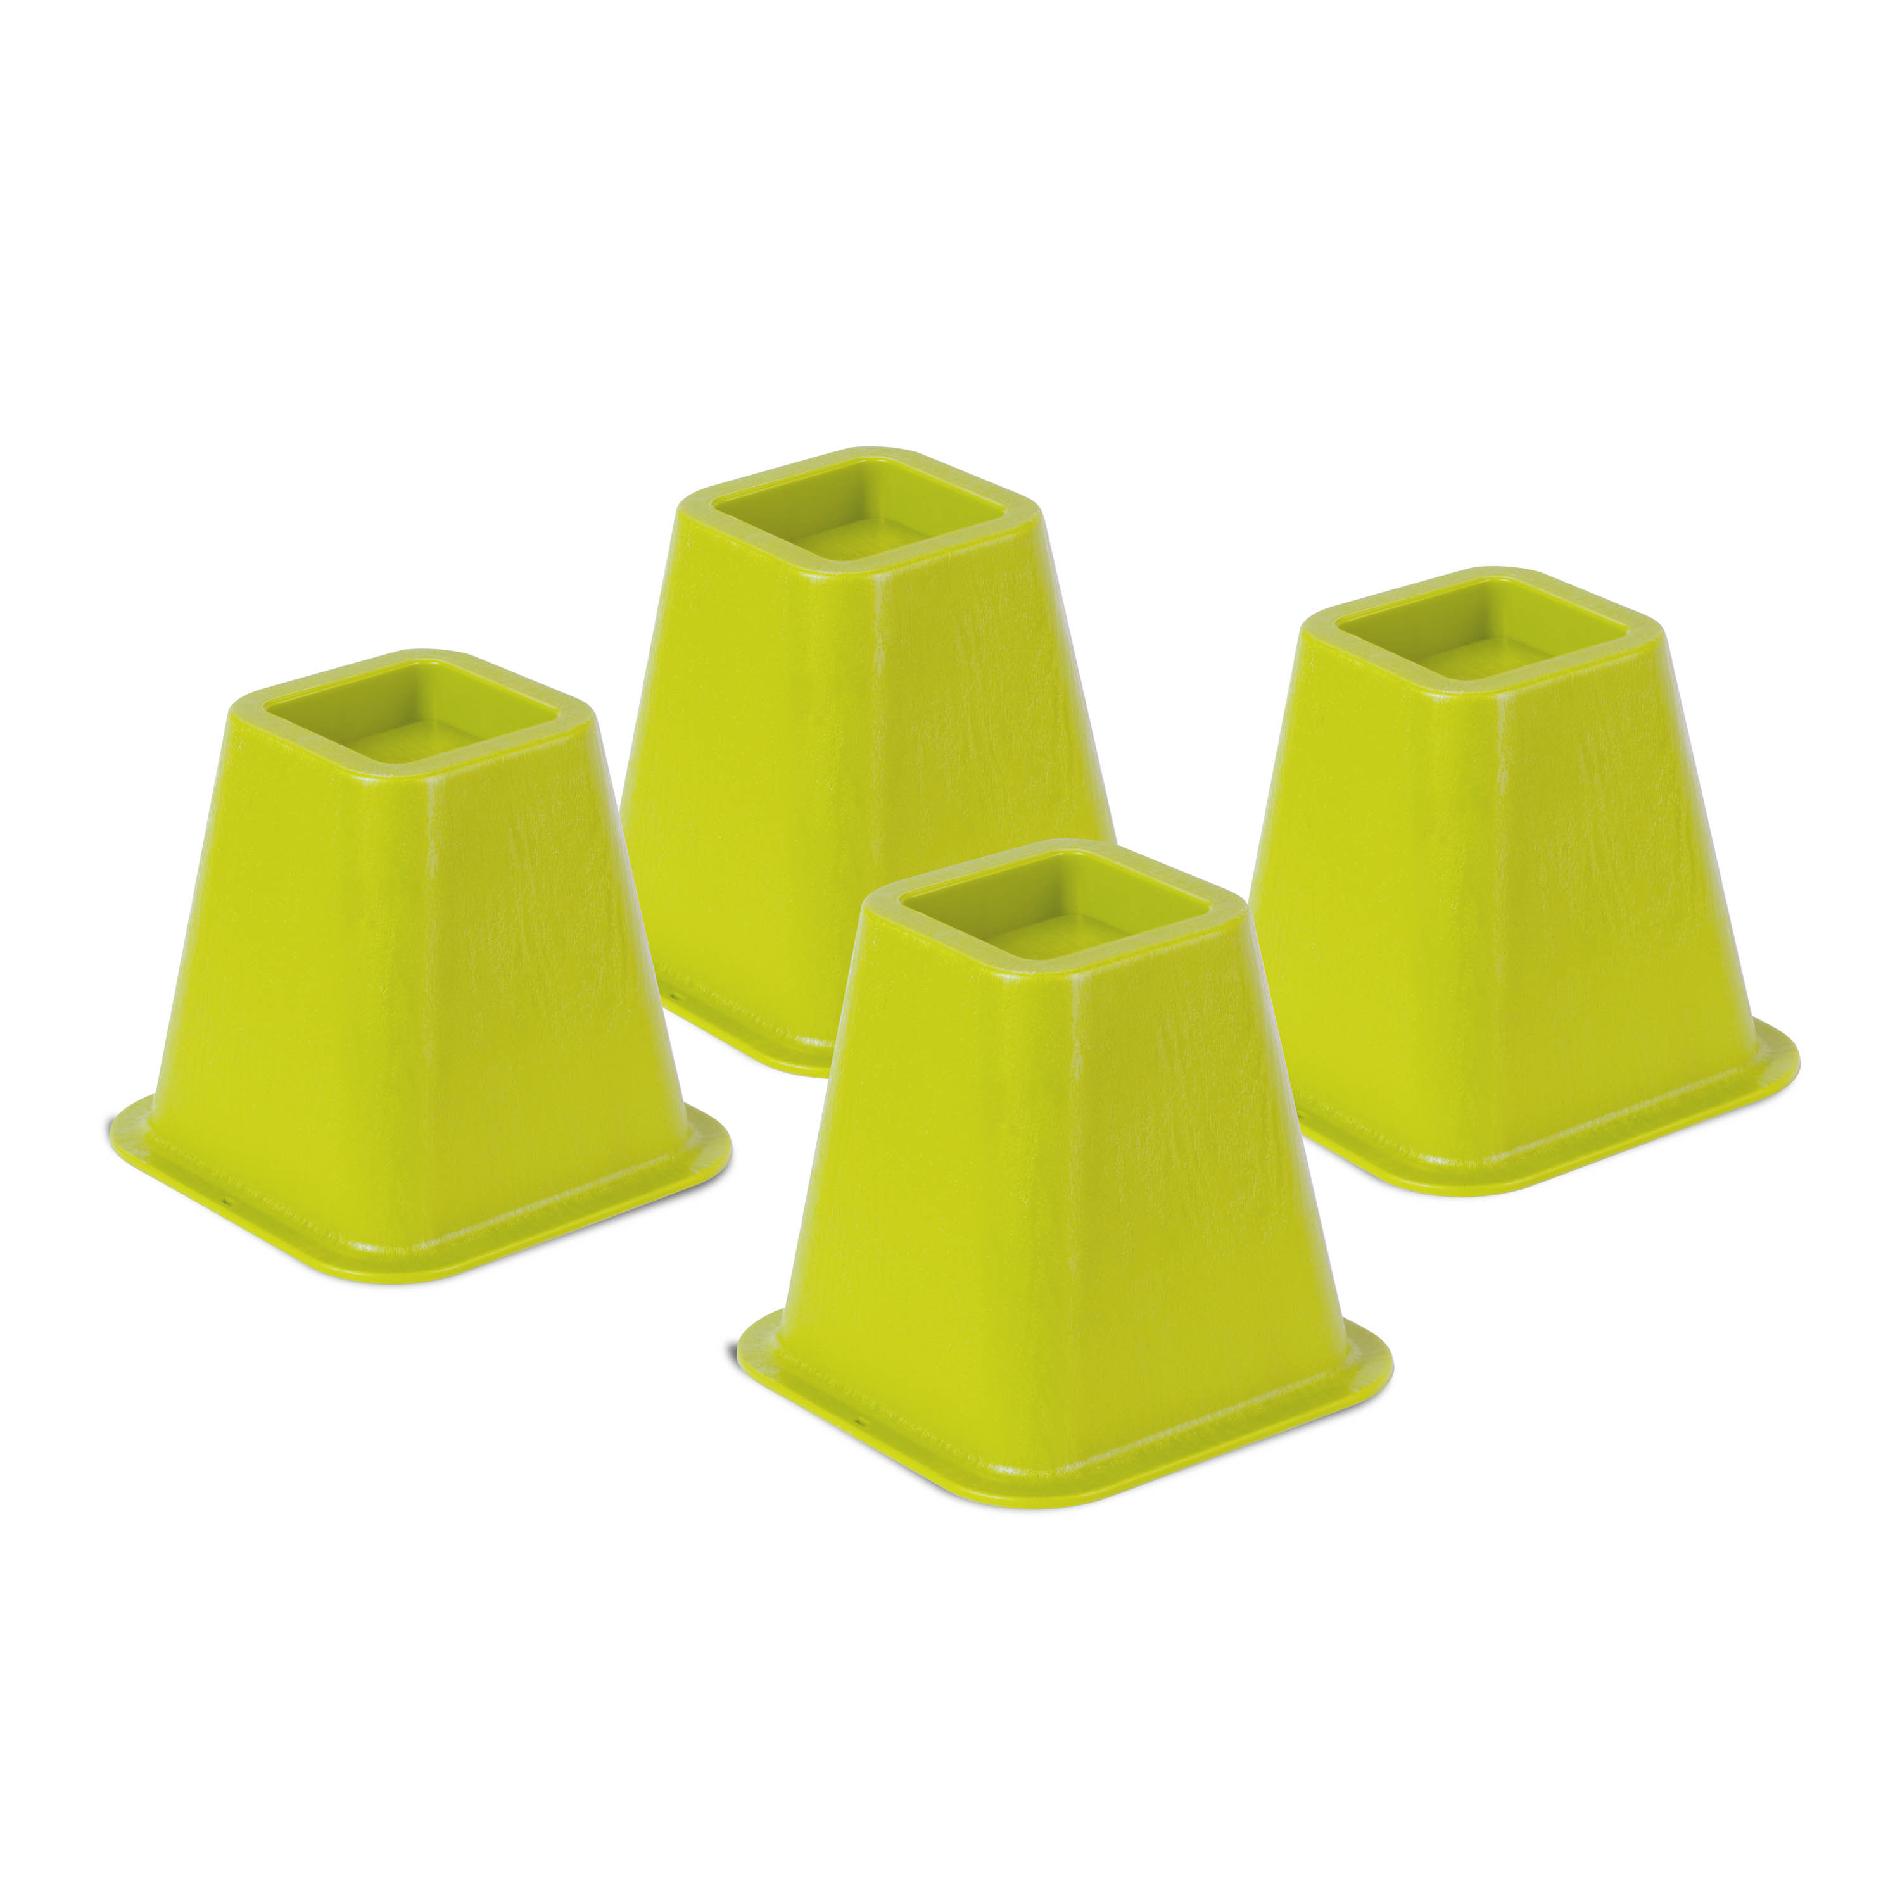 Honey Can Do Bed Risers - 4pk green